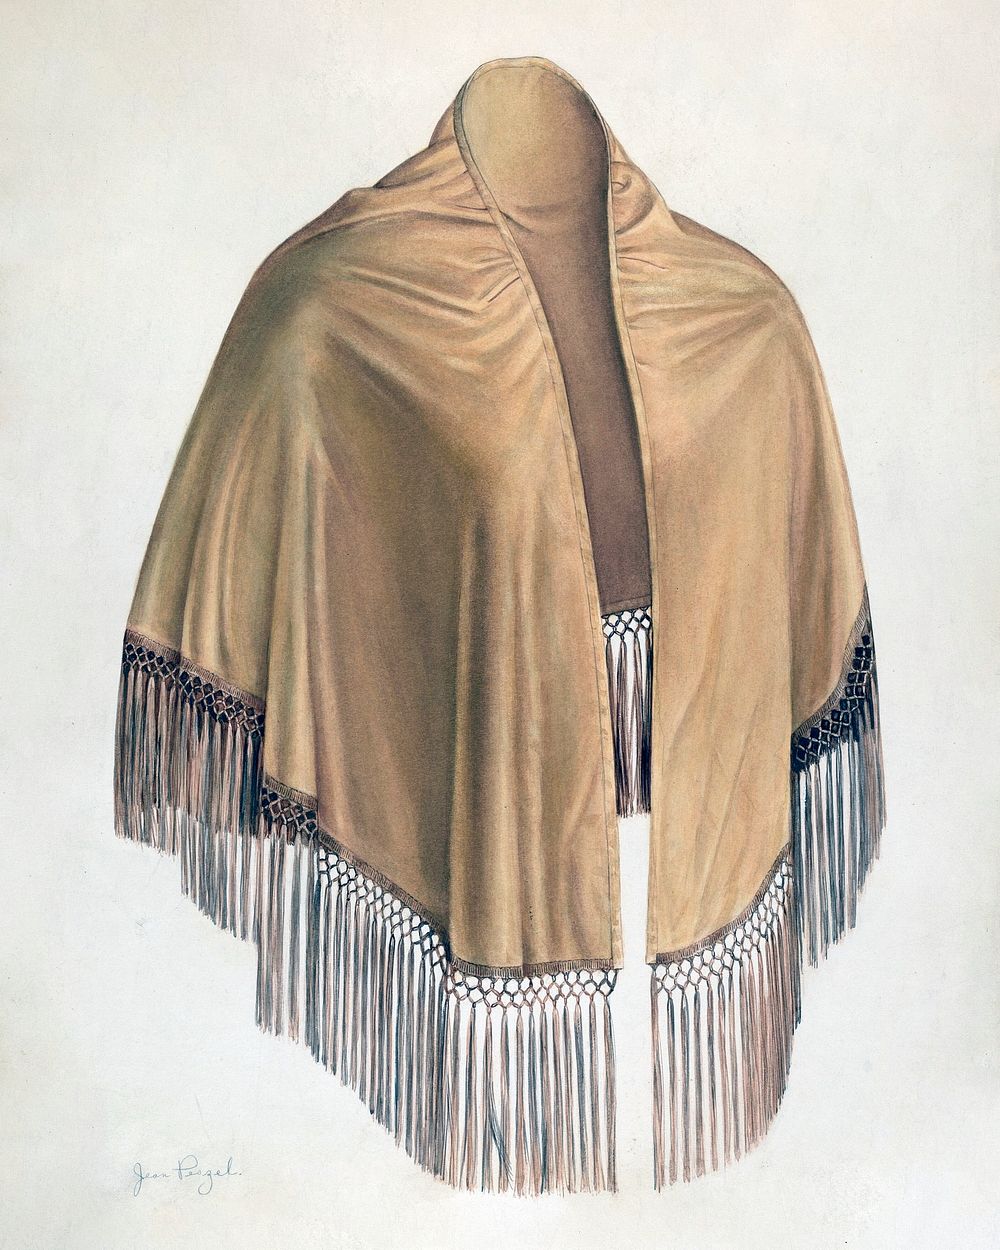 Shawl (ca. 1939) by Jean Peszel. Original from The National Gallery of Art. Digitally enhanced by rawpixel.